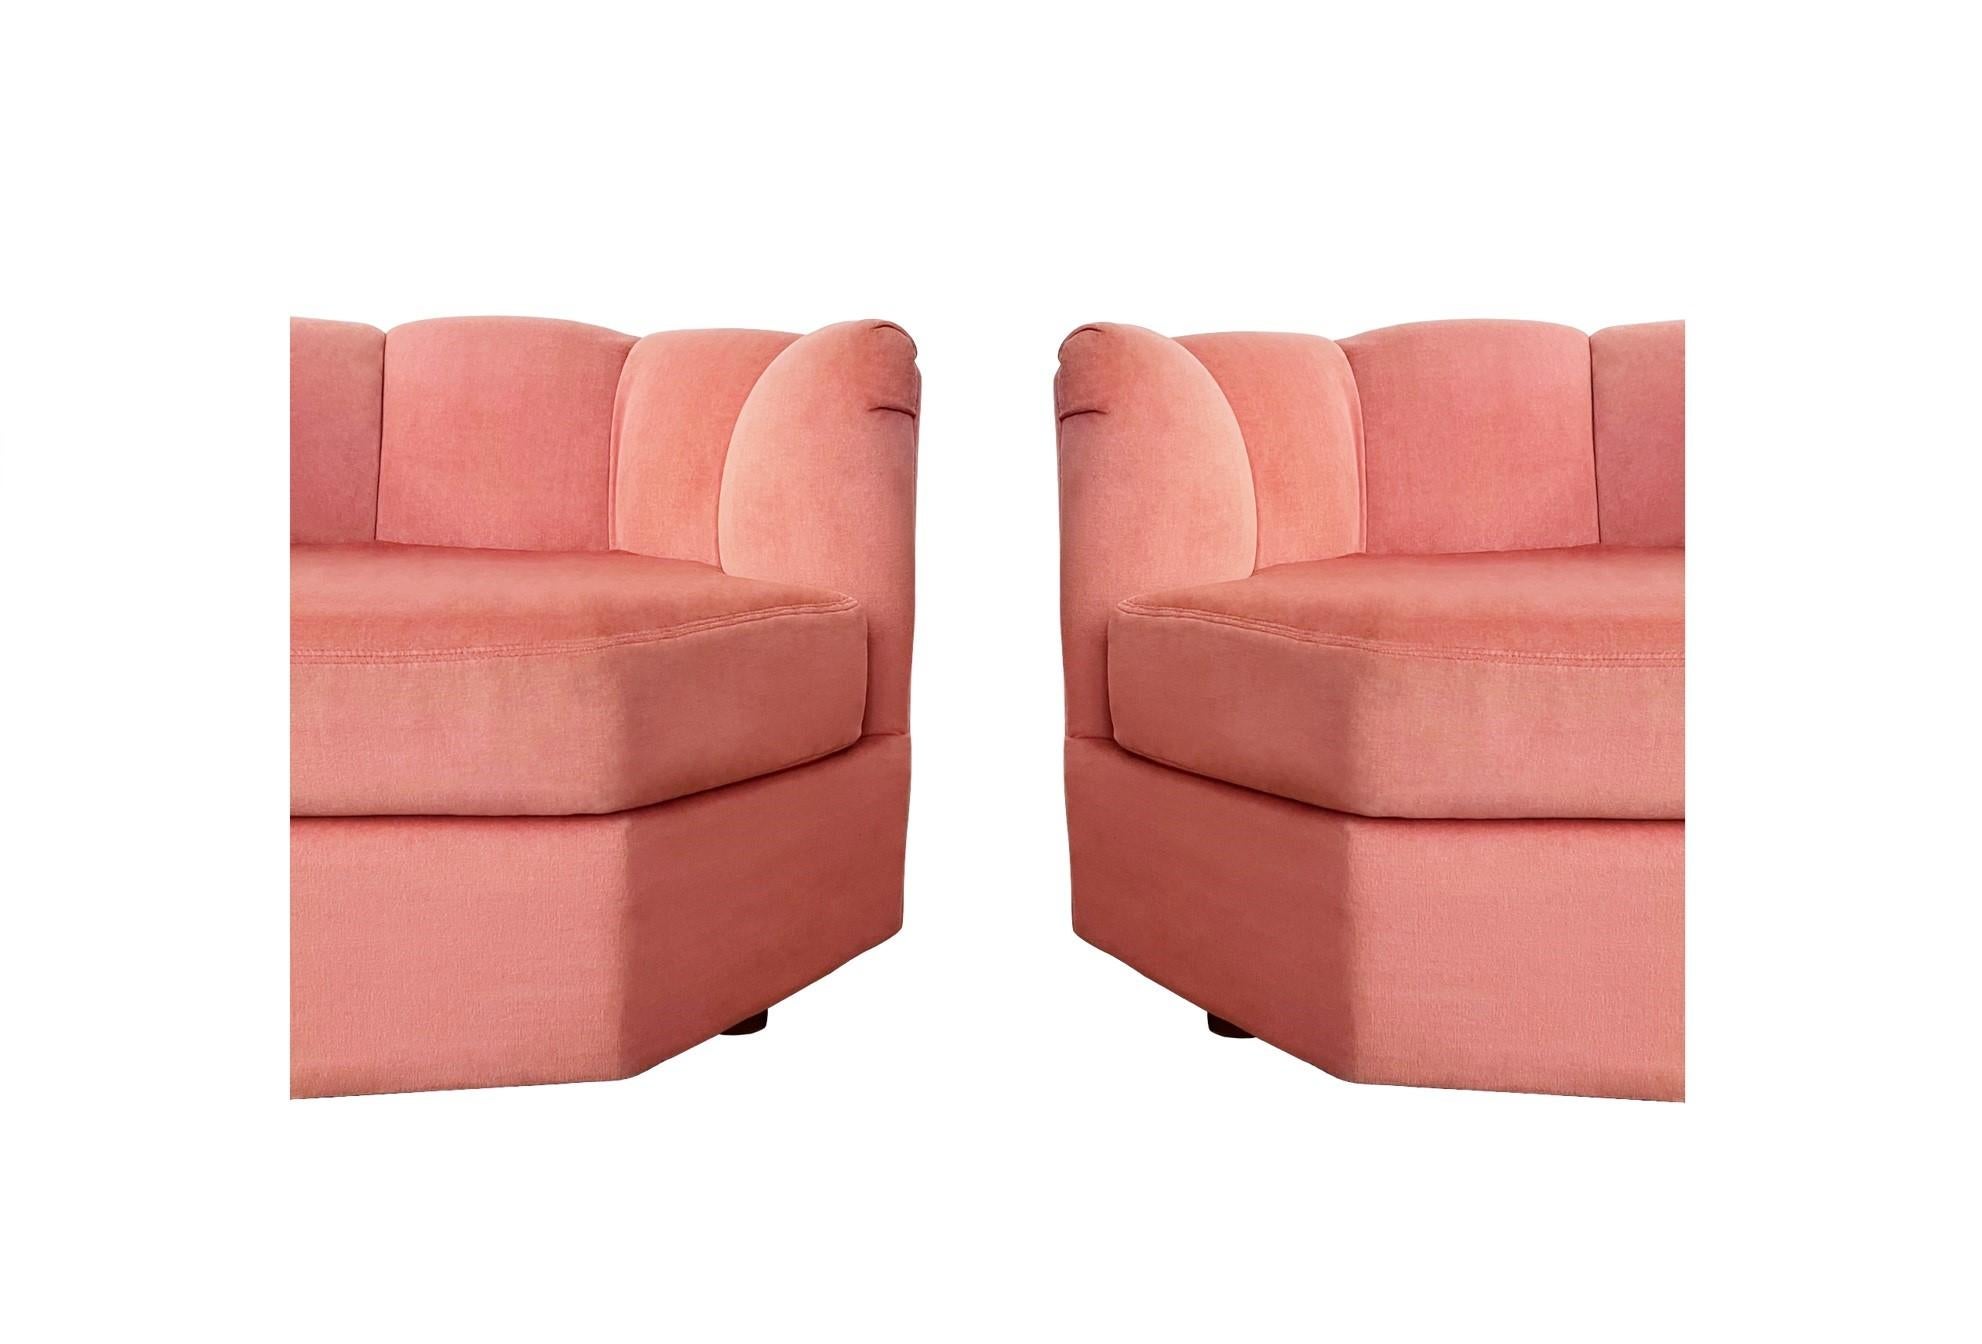 American 1970s Hexagonal Club Chairs in a Dusty Rose Velvet For Sale